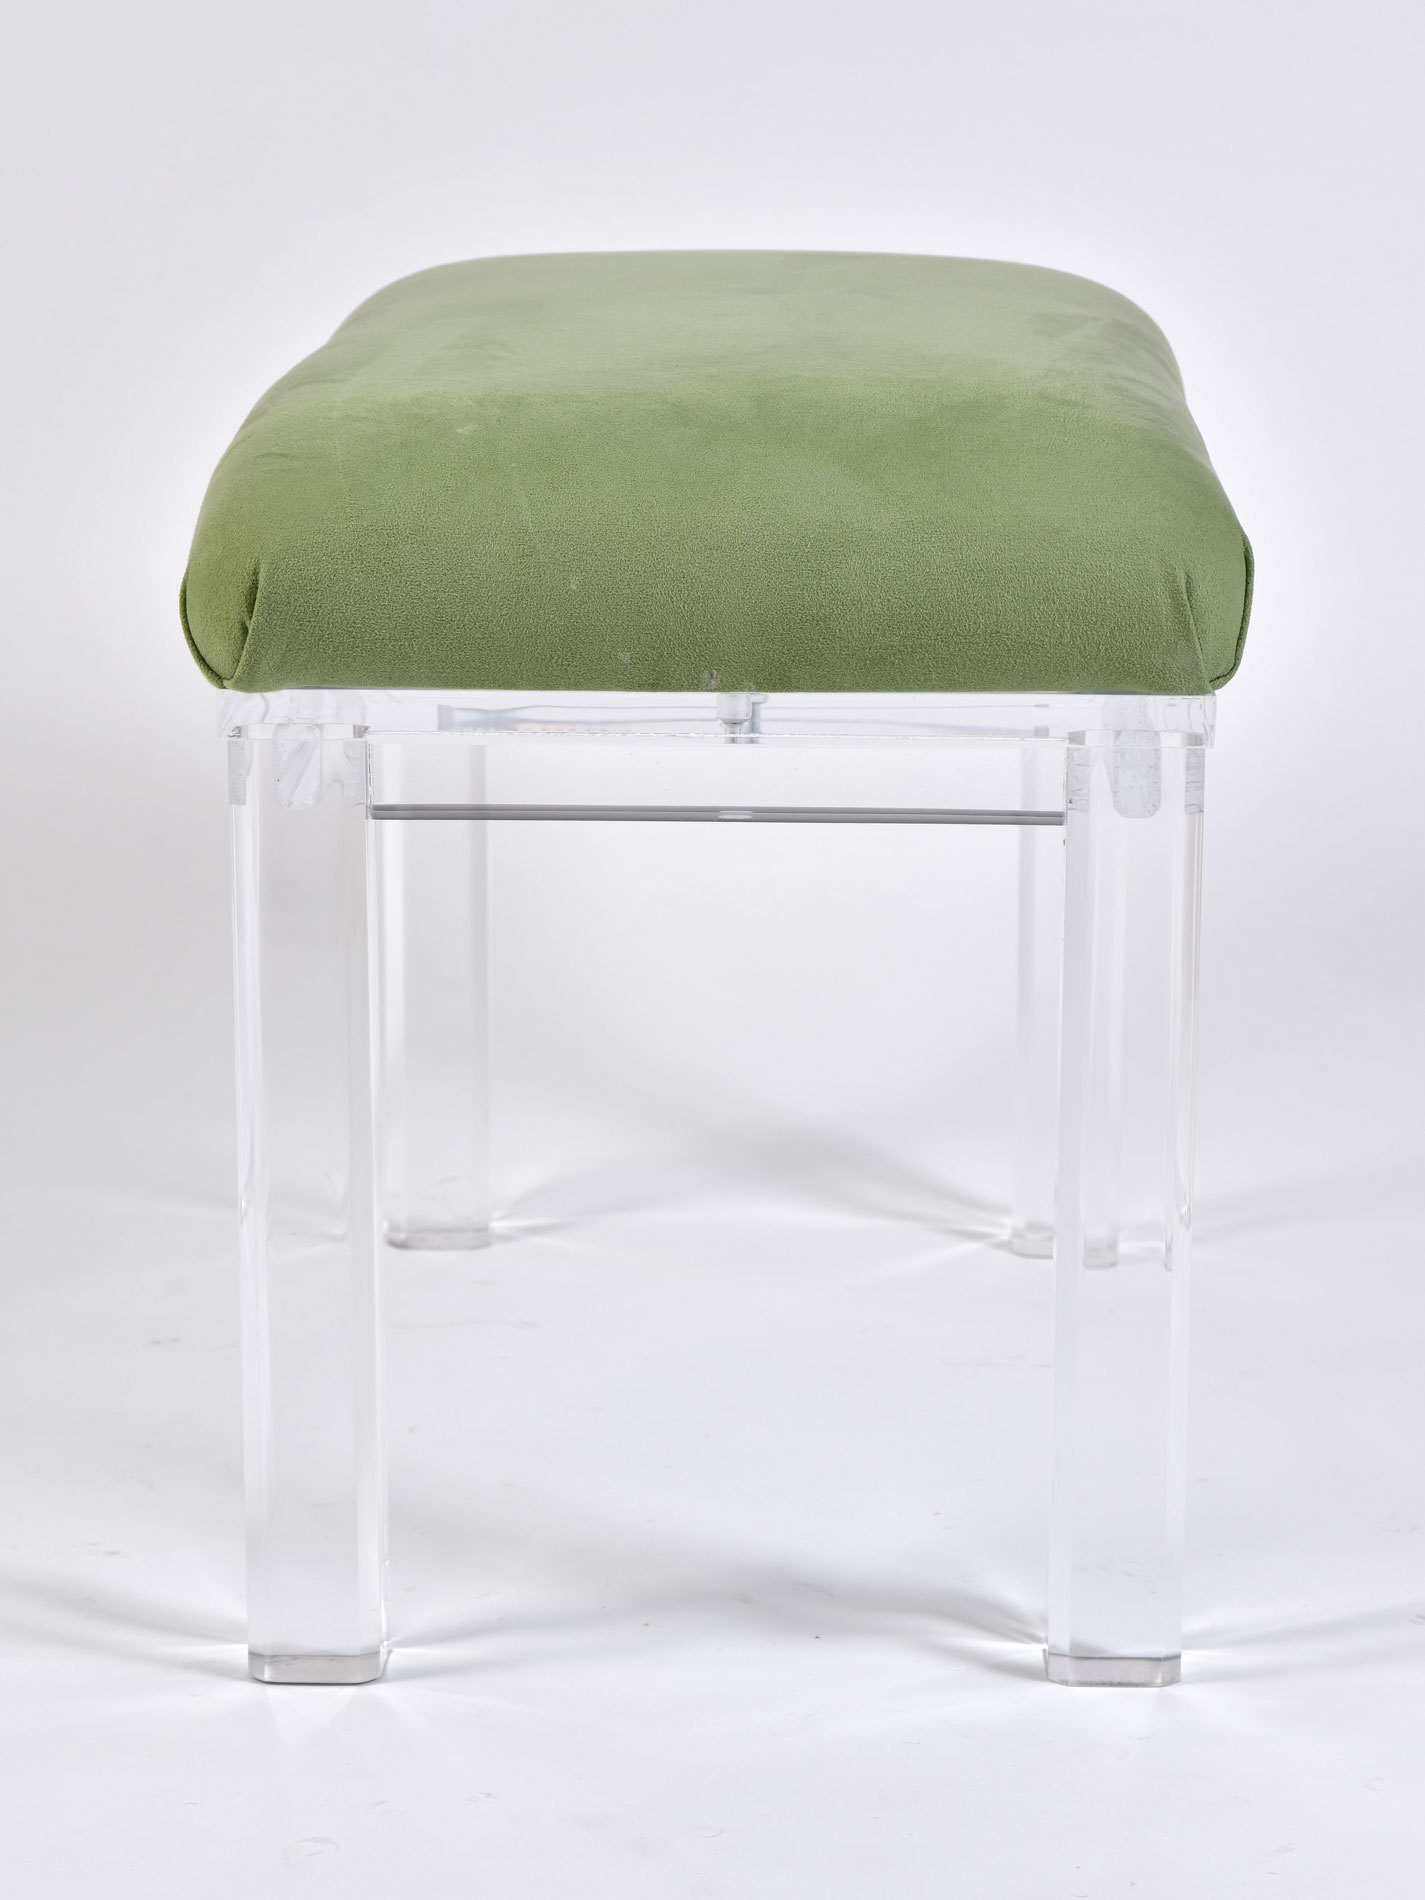 The image for Carmichael Lucite Bench 03